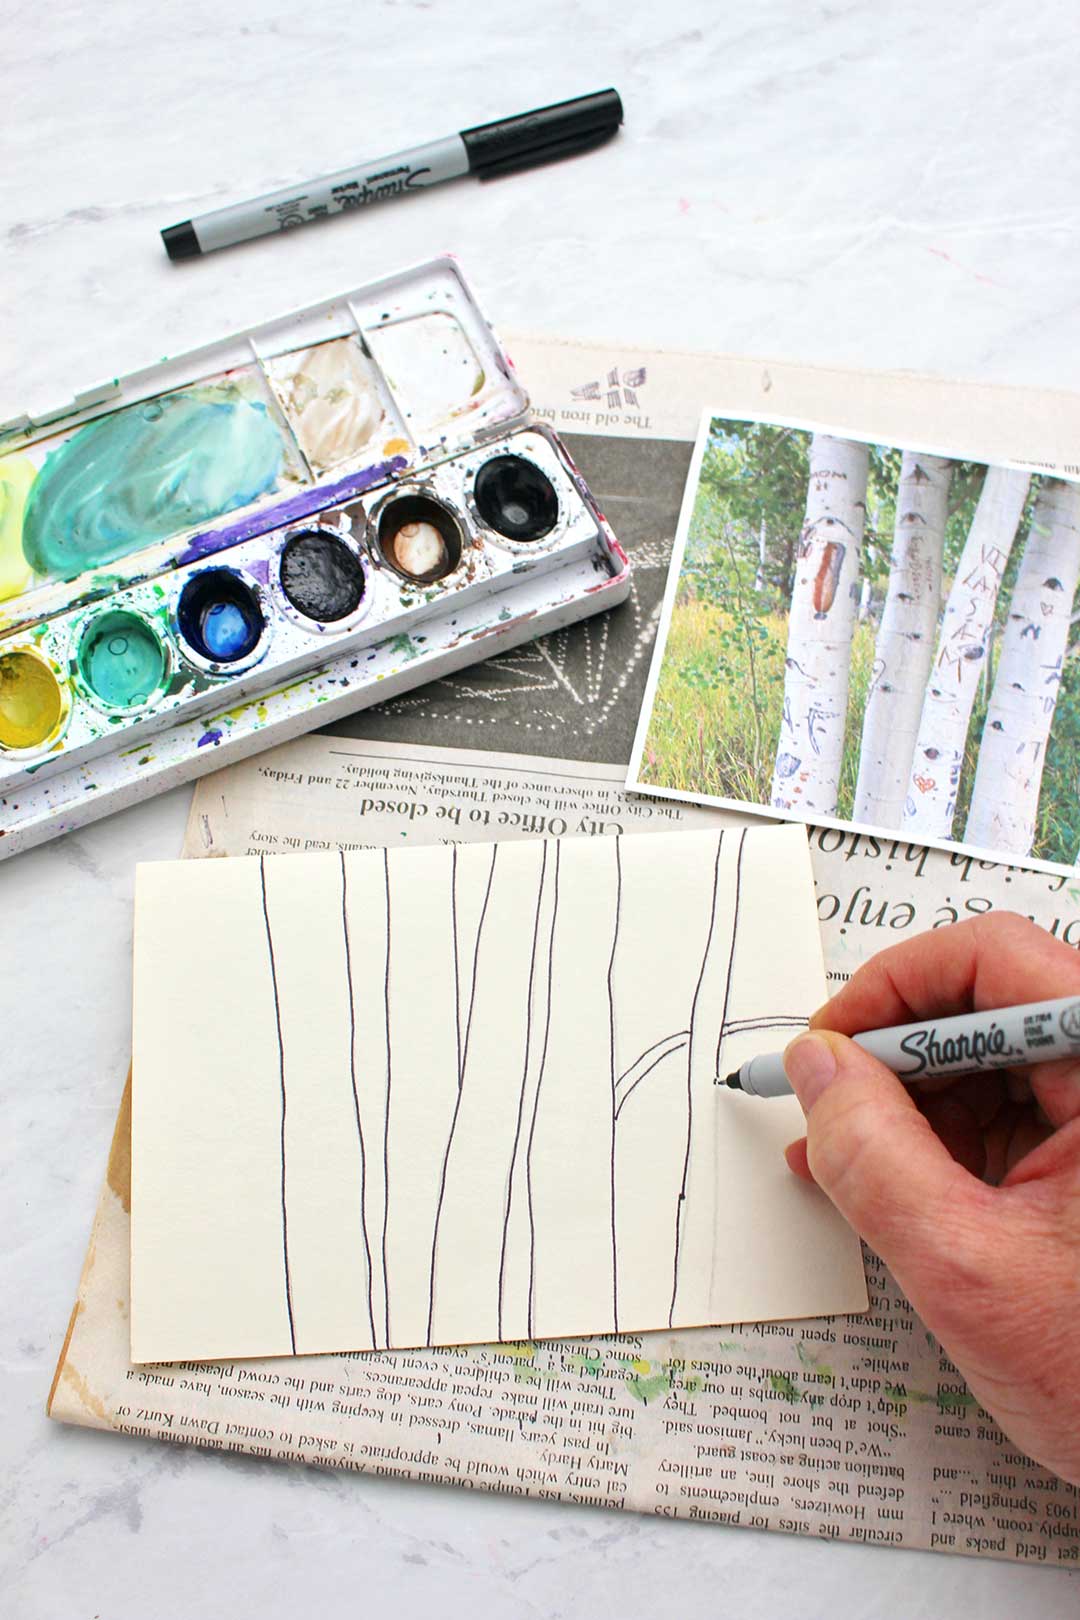 Hand sketching aspen tree trunks with a sharpie marker from an inspiration photo.